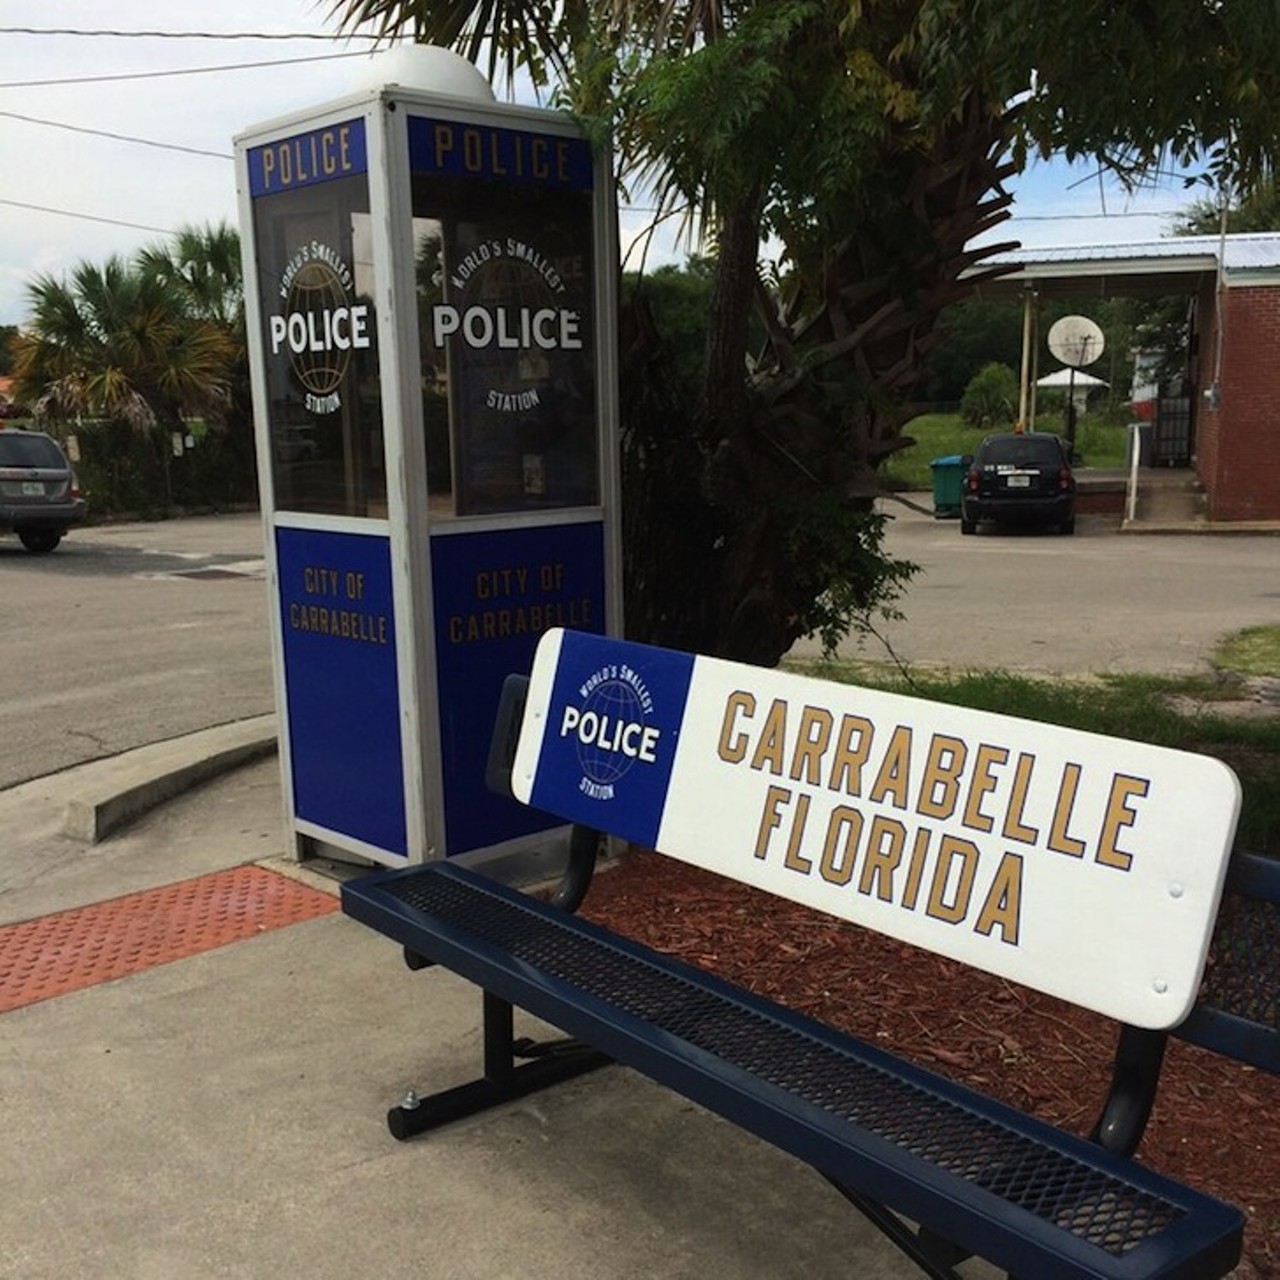 Step inside the world&#146;s smallest police station
World&#146;s Smallest Police Station l 105 St. James Street, Carrabelle l 850-697-2585
This tiny station started out as a police phone box built to protect police officers from inclement weather while they made calls, but since its creation in 1963, it has been promoted to full &#147;station.&#148; The booth is more of a museum than a functioning office however, as the insides are crammed with the municipal building&#146;s history. The spot was featured on  Ripley&#146;s Believe It Or Not and The Today Show, but has also received a lot of negative attention and has even been shot at before.
Photo via Angela F. W./Yelp